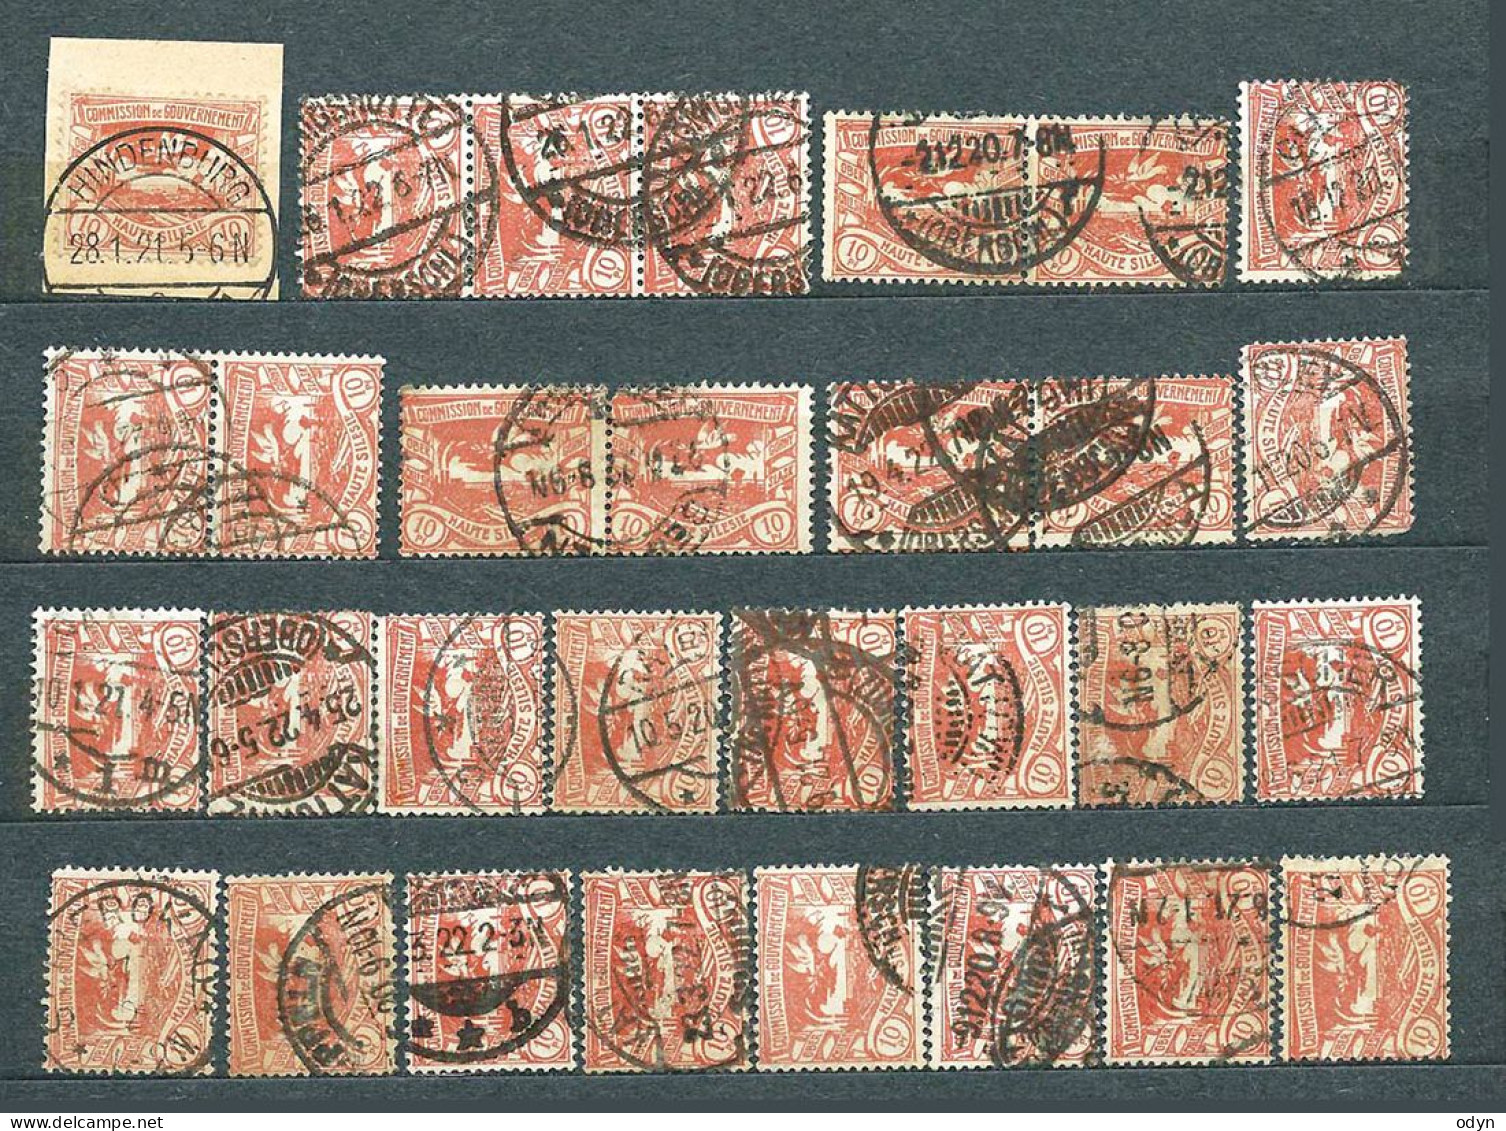 Plebiscite, Upper Silesia, 1920; Lot Of 287 Stamps From Set MiNr 13-29 - Used - Schlesien